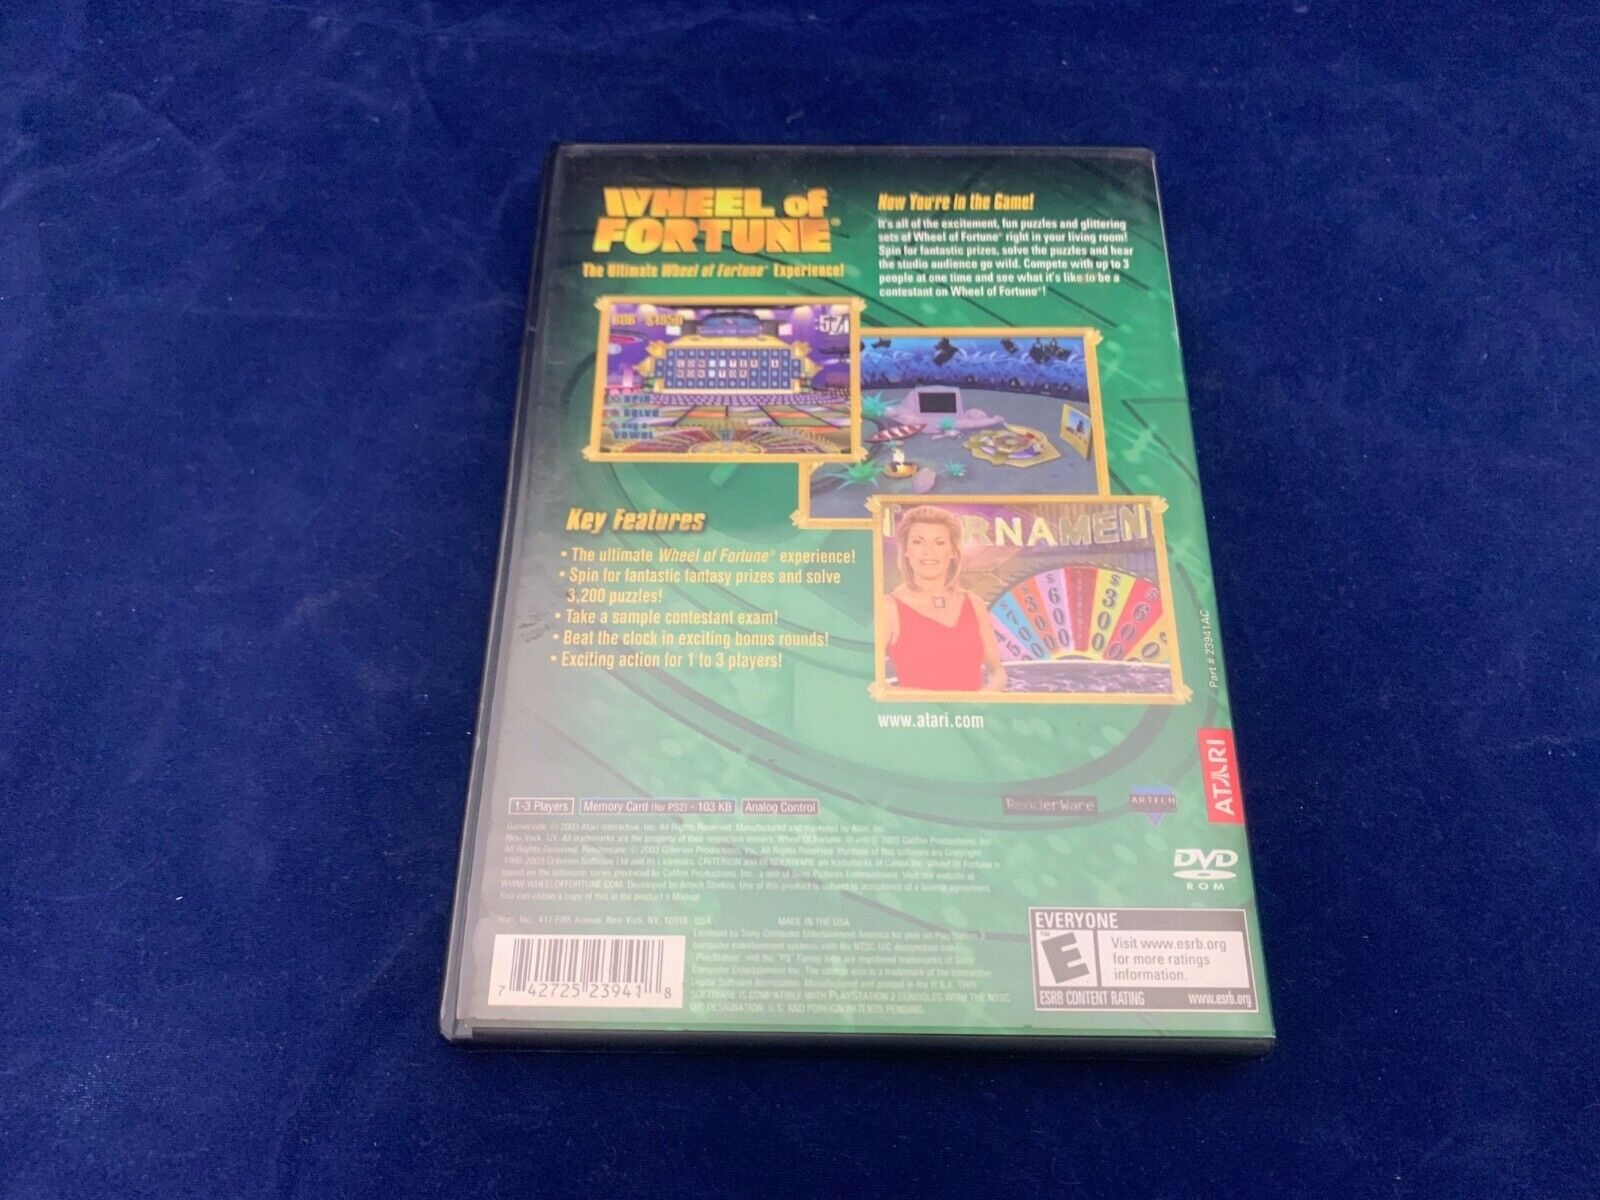 Wheel Of Fortune for PlayStation 2 Previously Owned no instructions